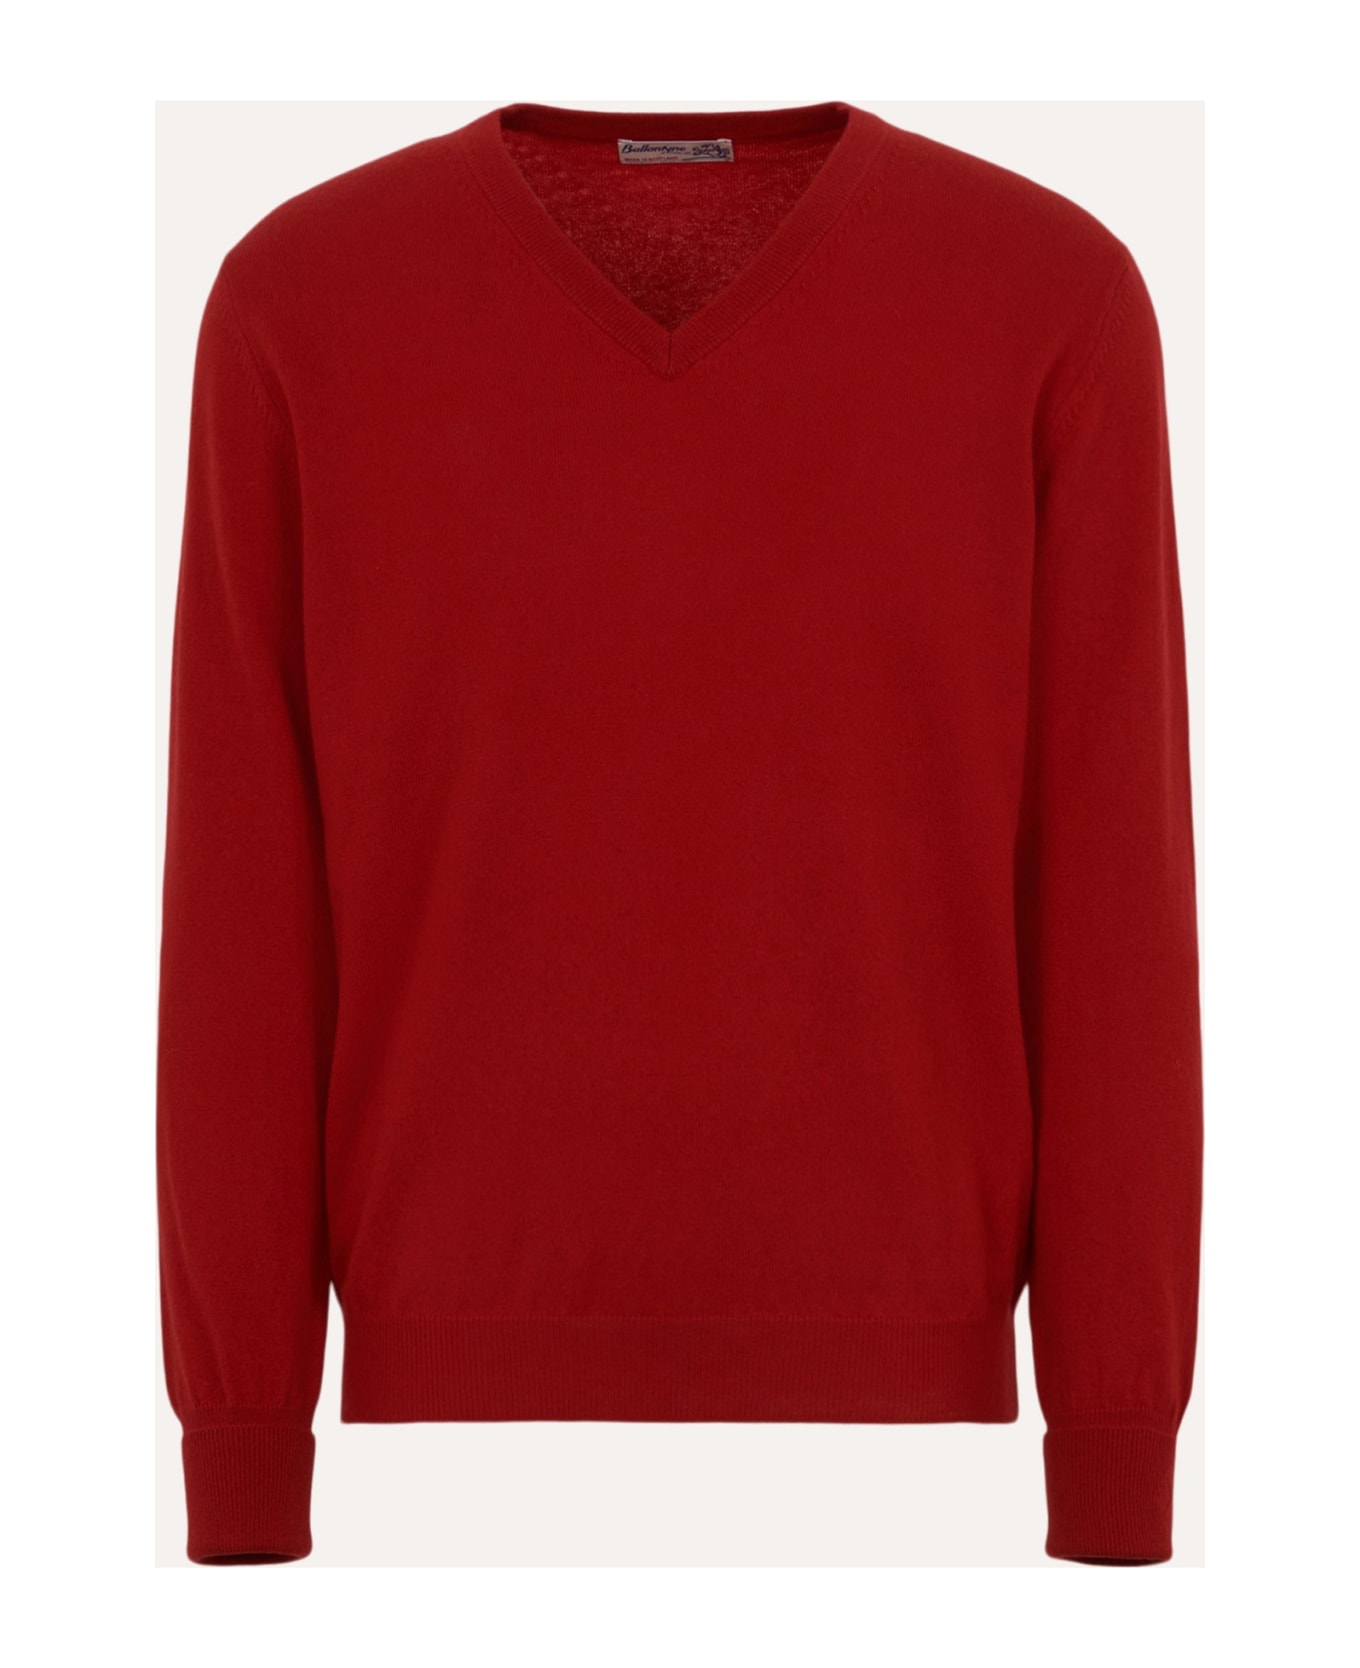 Ballantyne Cashmere Pullover - Red